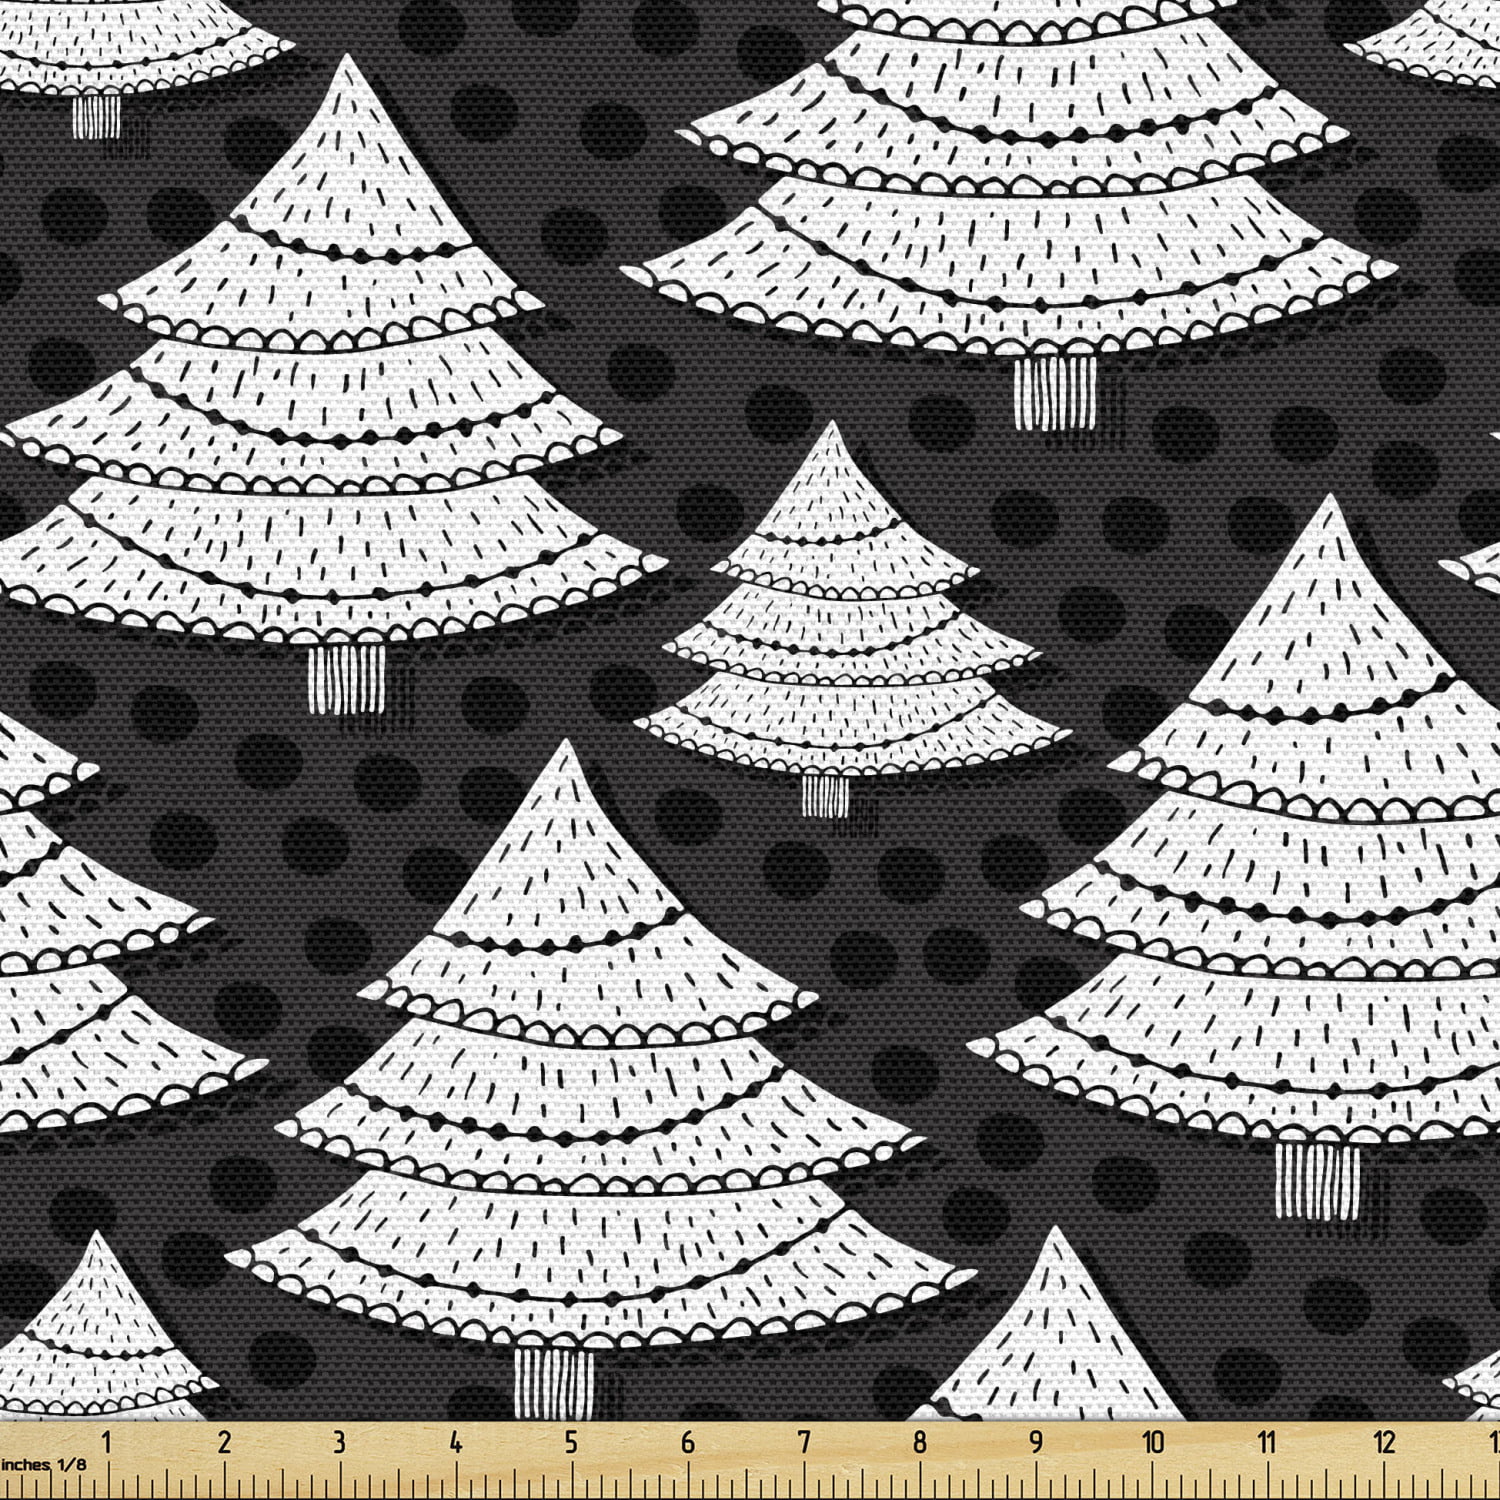 100% Cotton Fabric by the Yard,Quilting,Apparel,HomeDecor Metallic Christmas Trees Crafts,Holidays,White Red Green Specks,Black Background